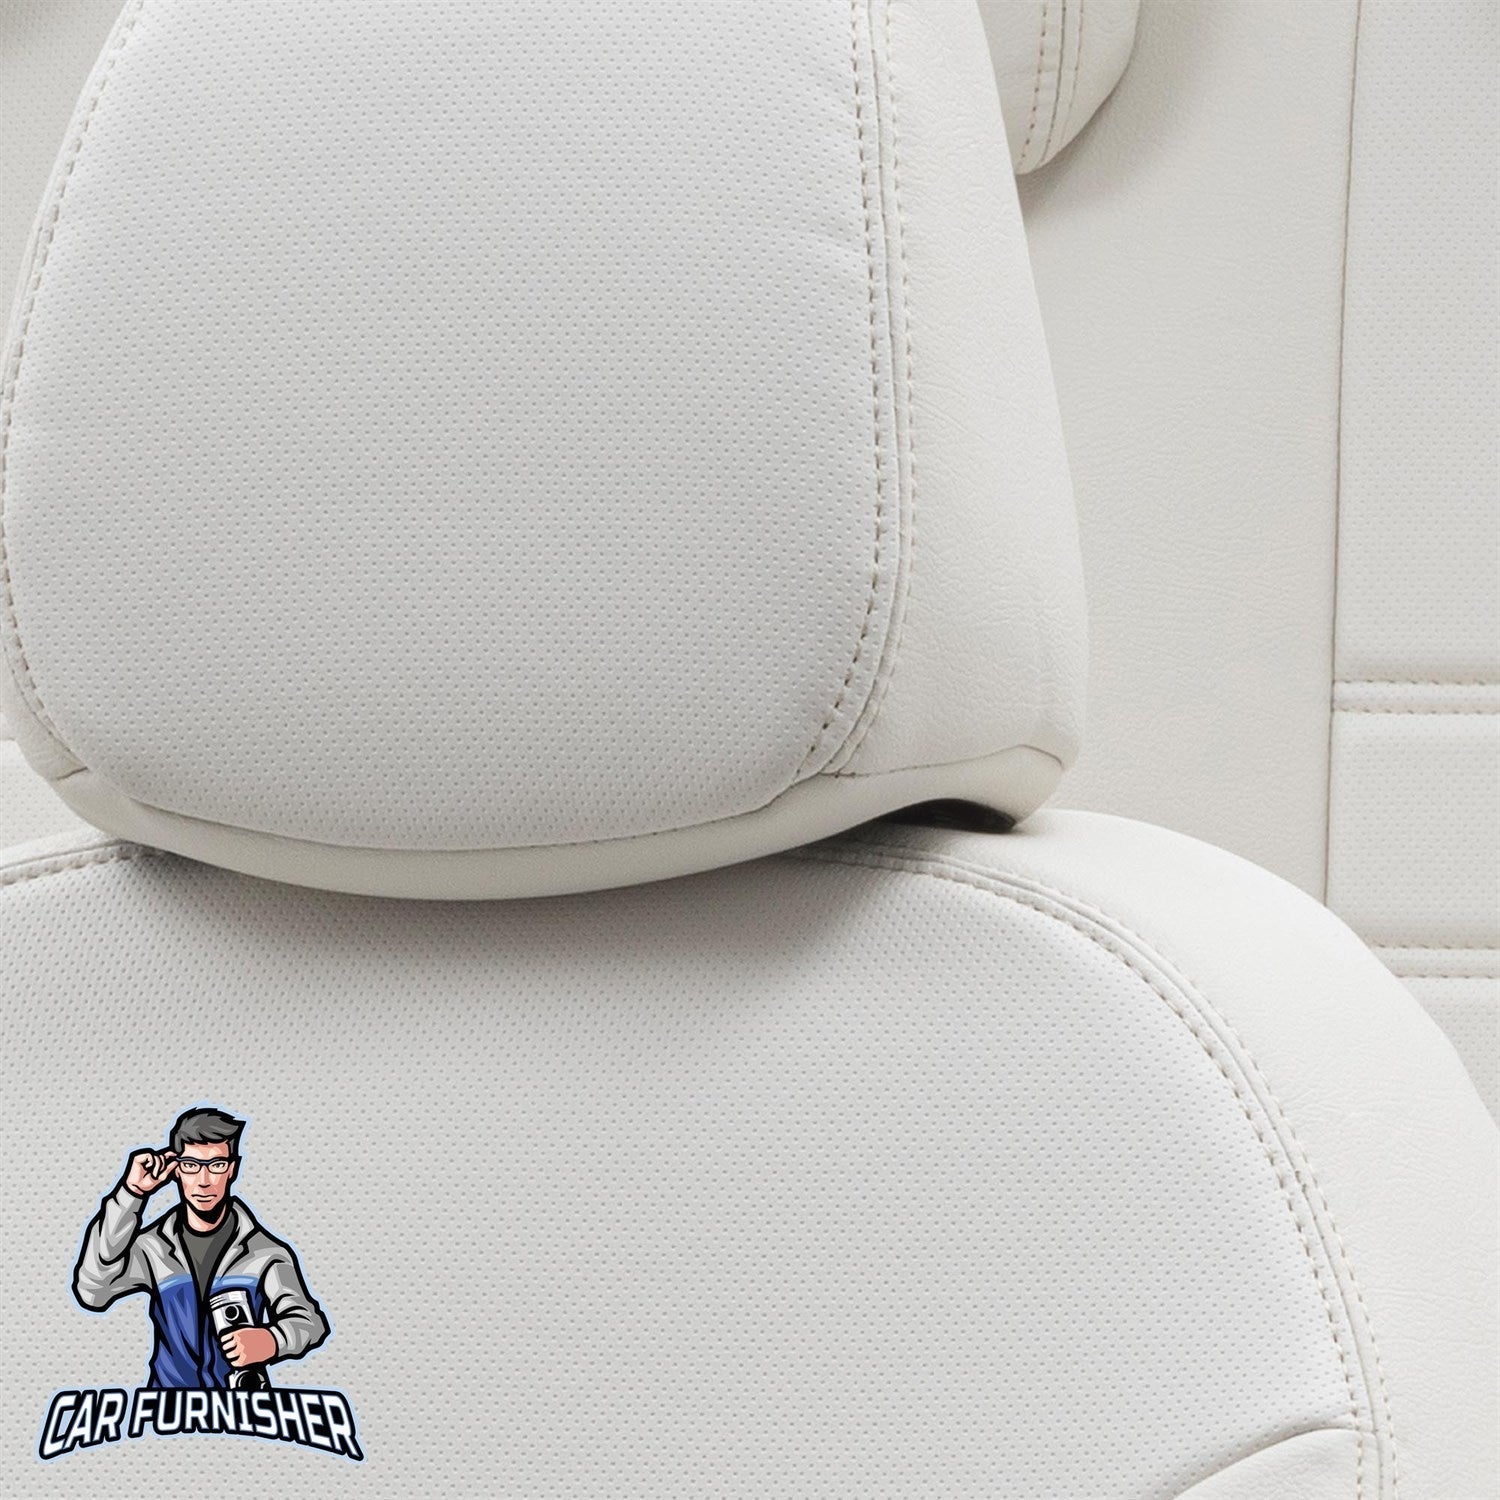 Peugeot Bipper Seat Covers Istanbul Leather Design Ivory Leather